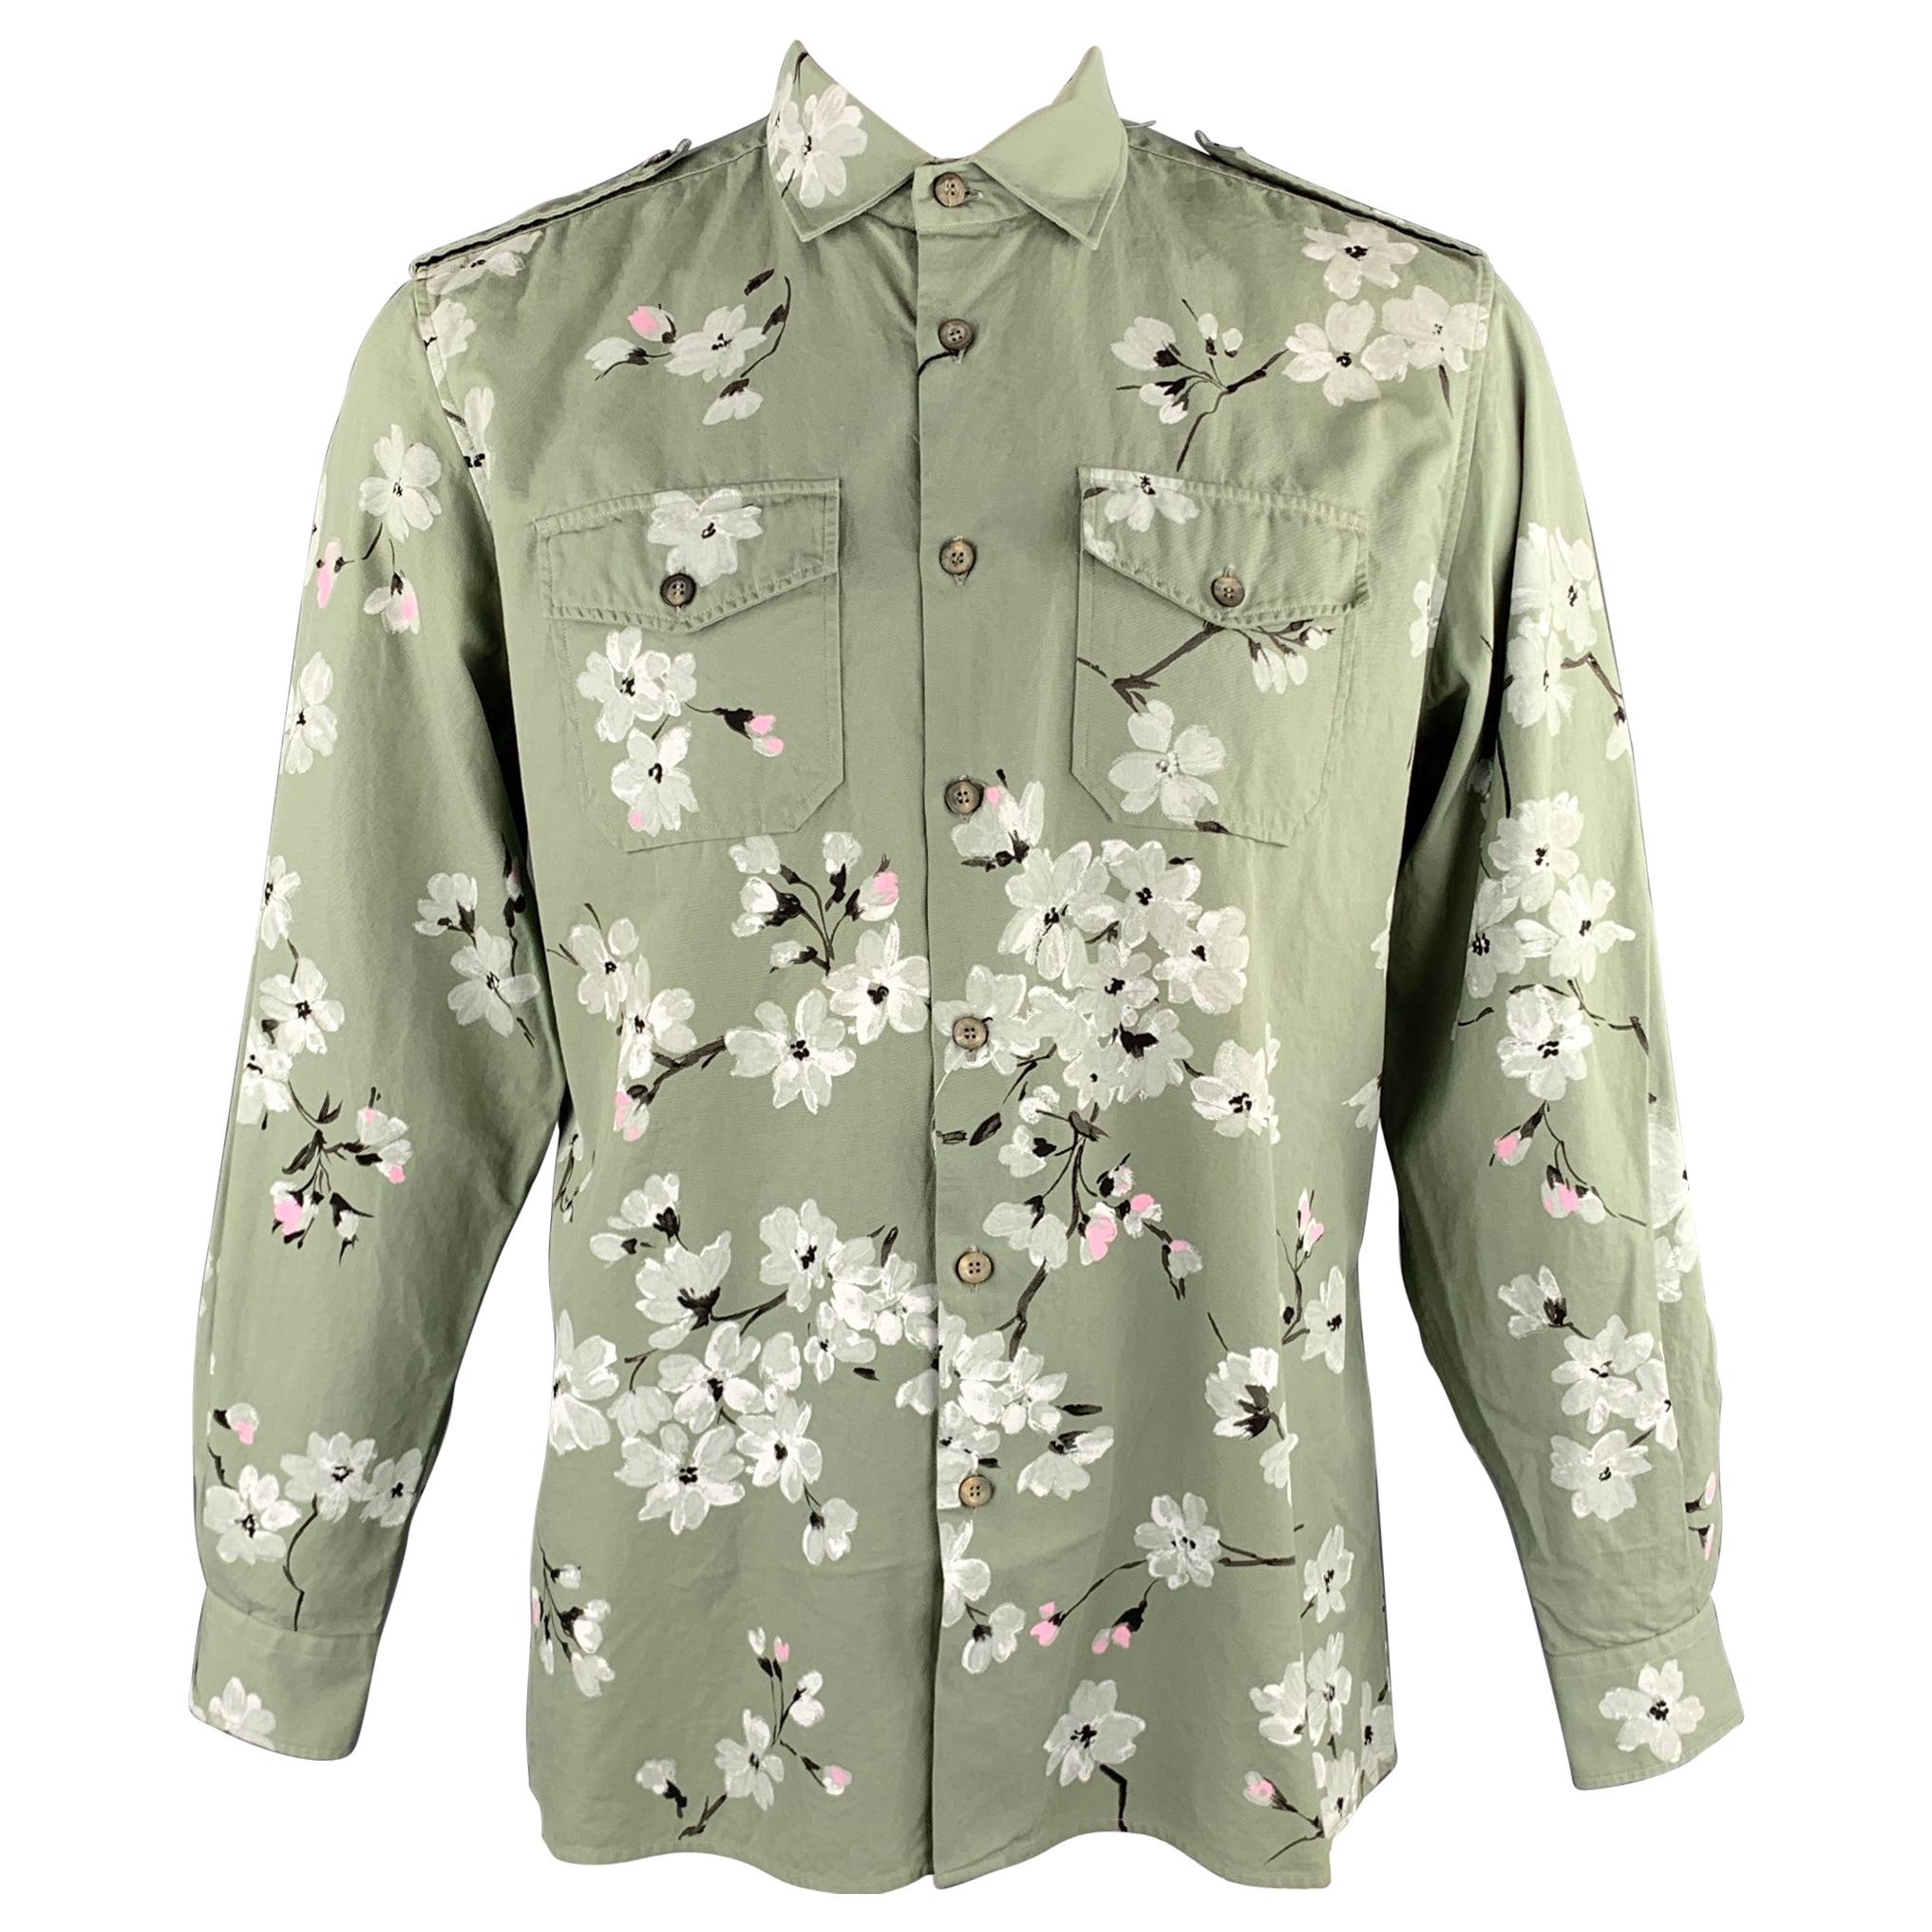 GUCCI by TOM FORD Spring 2003 Size M Olive Hand Painted Cotton Shirt